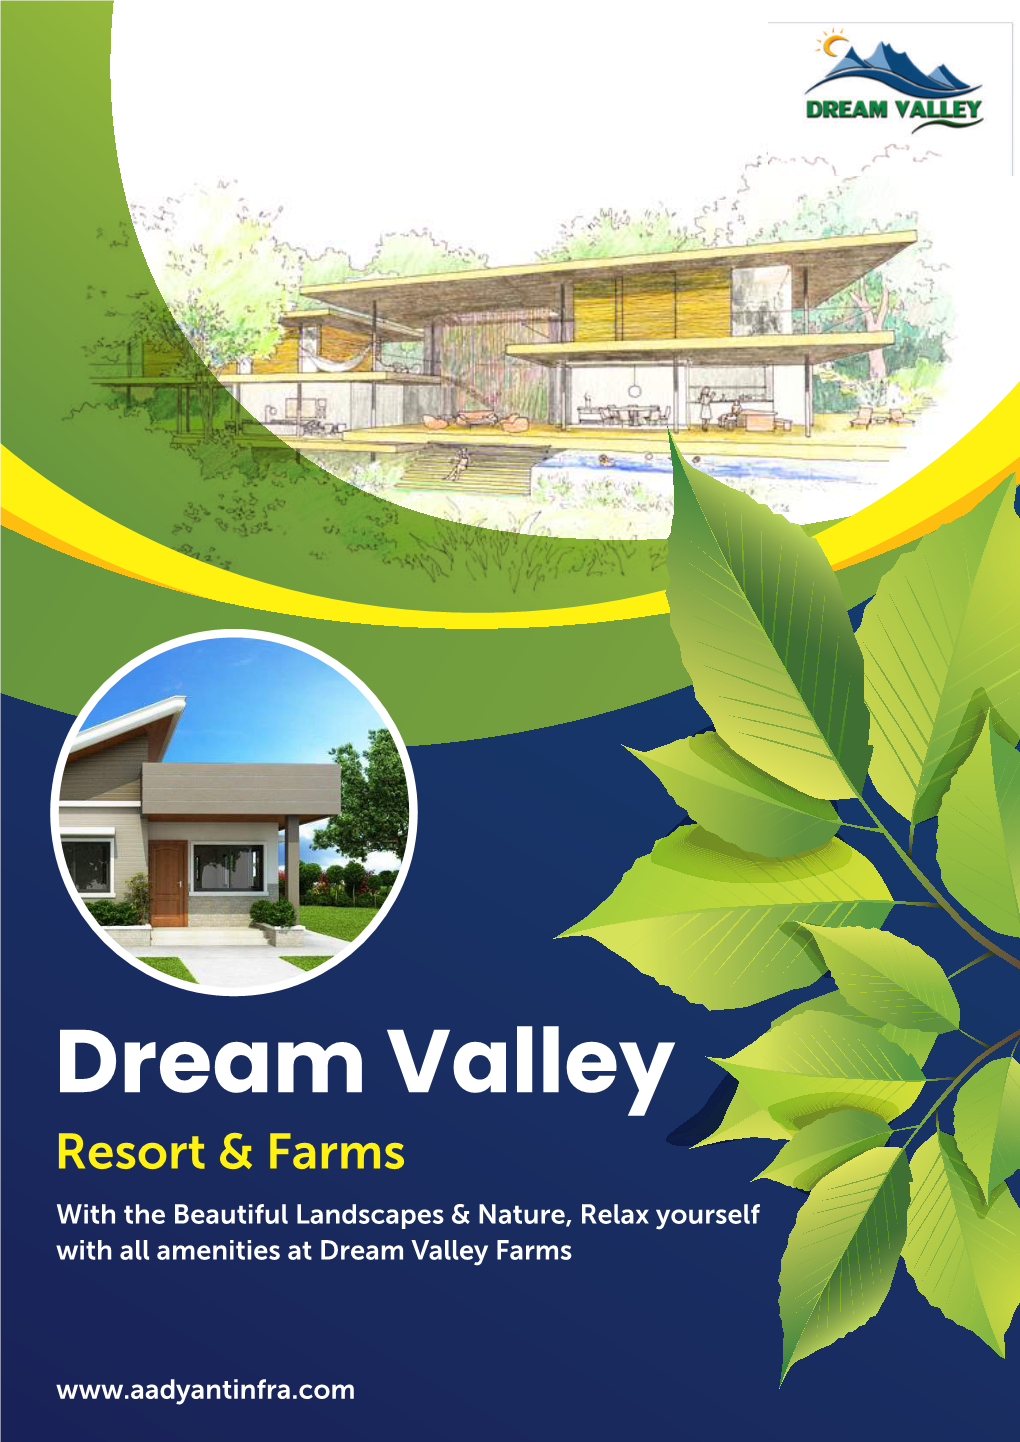 Dream Valley Resort Amenities with the Beautiful Landscapes & Nature, Relax Yourself with All Amenities at Dream Valley Farms